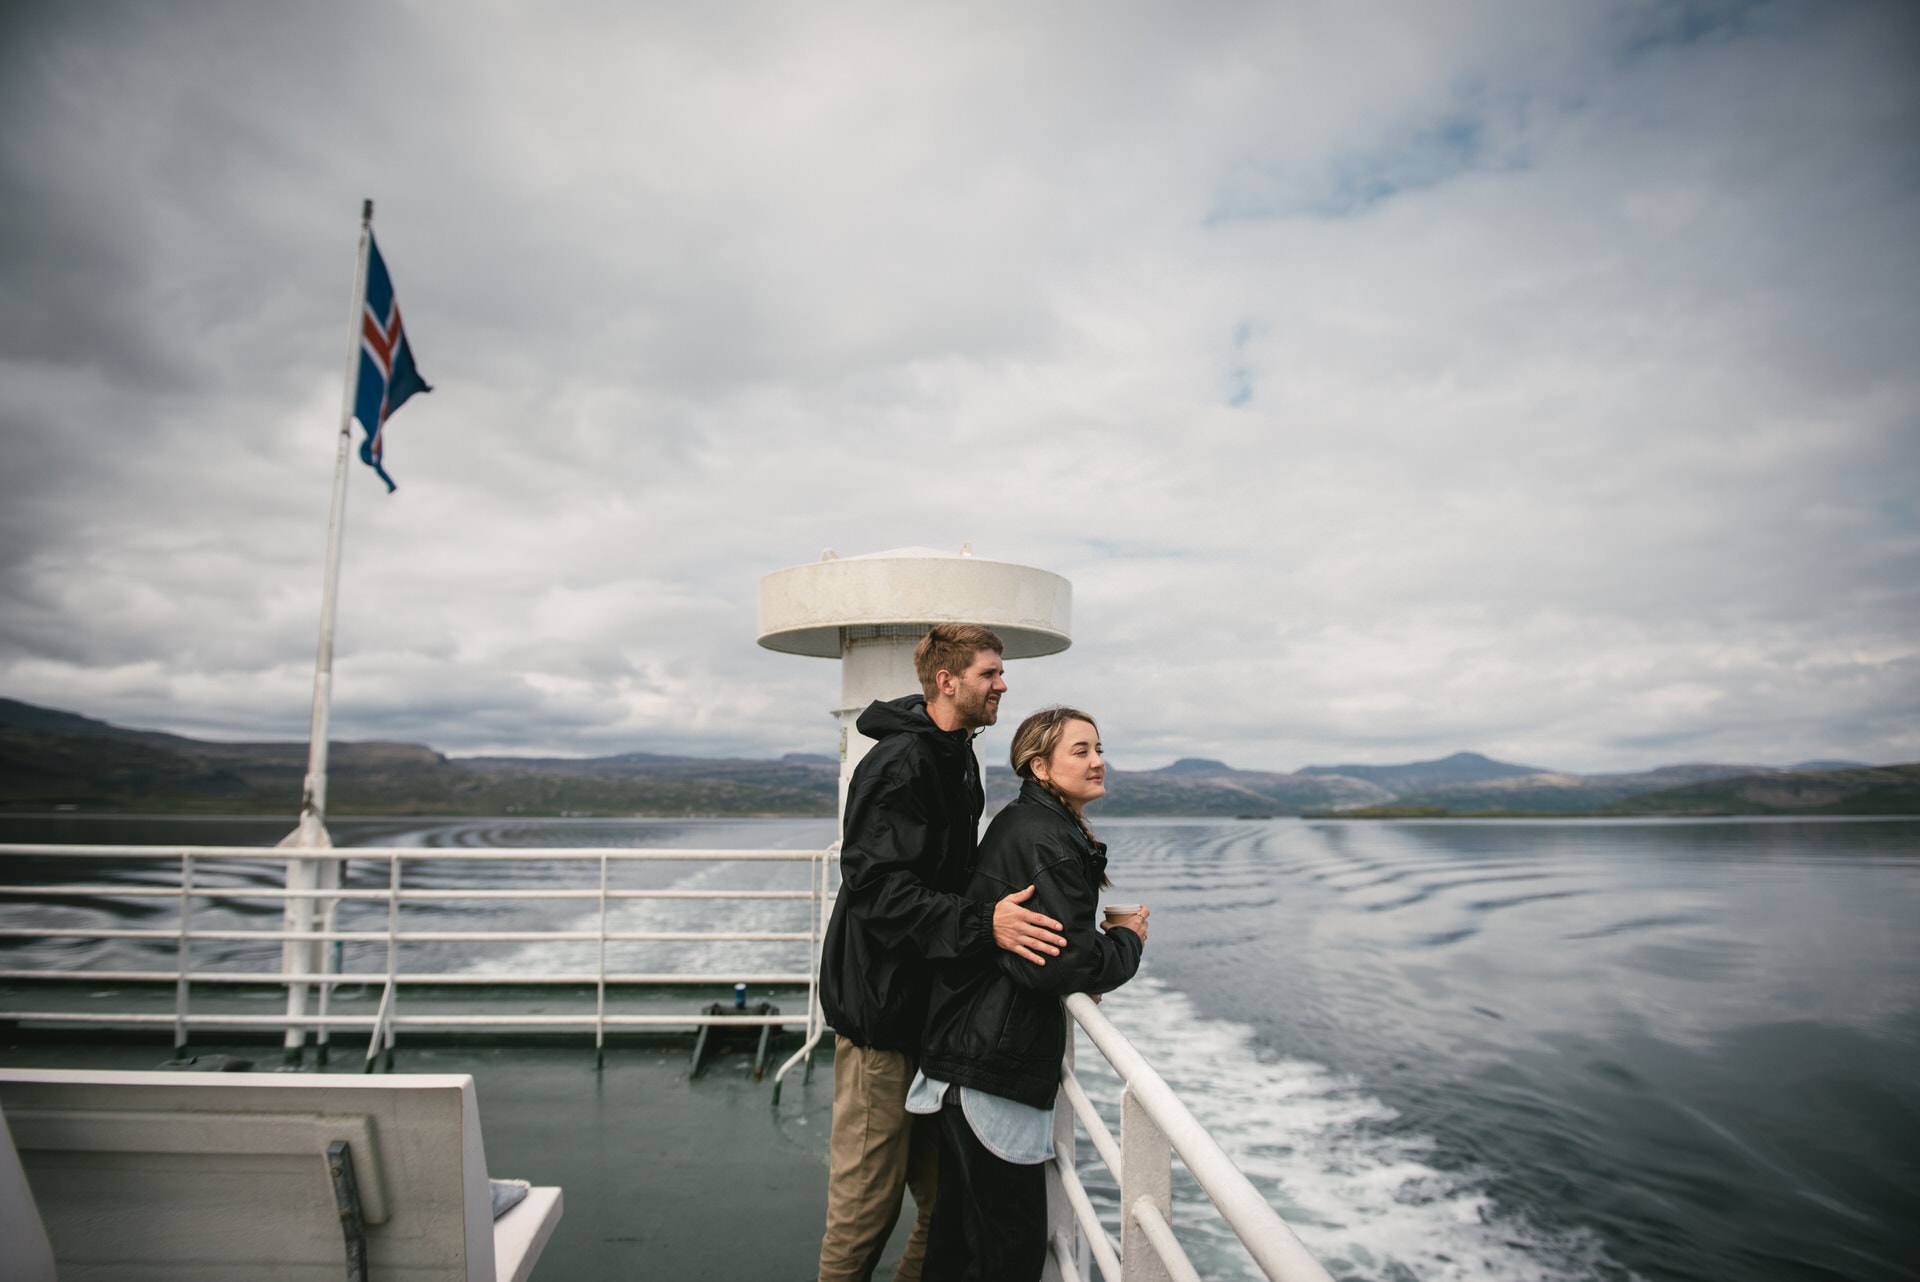 Loving embrace shared against the backdrop of Iceland's majestic fjords.